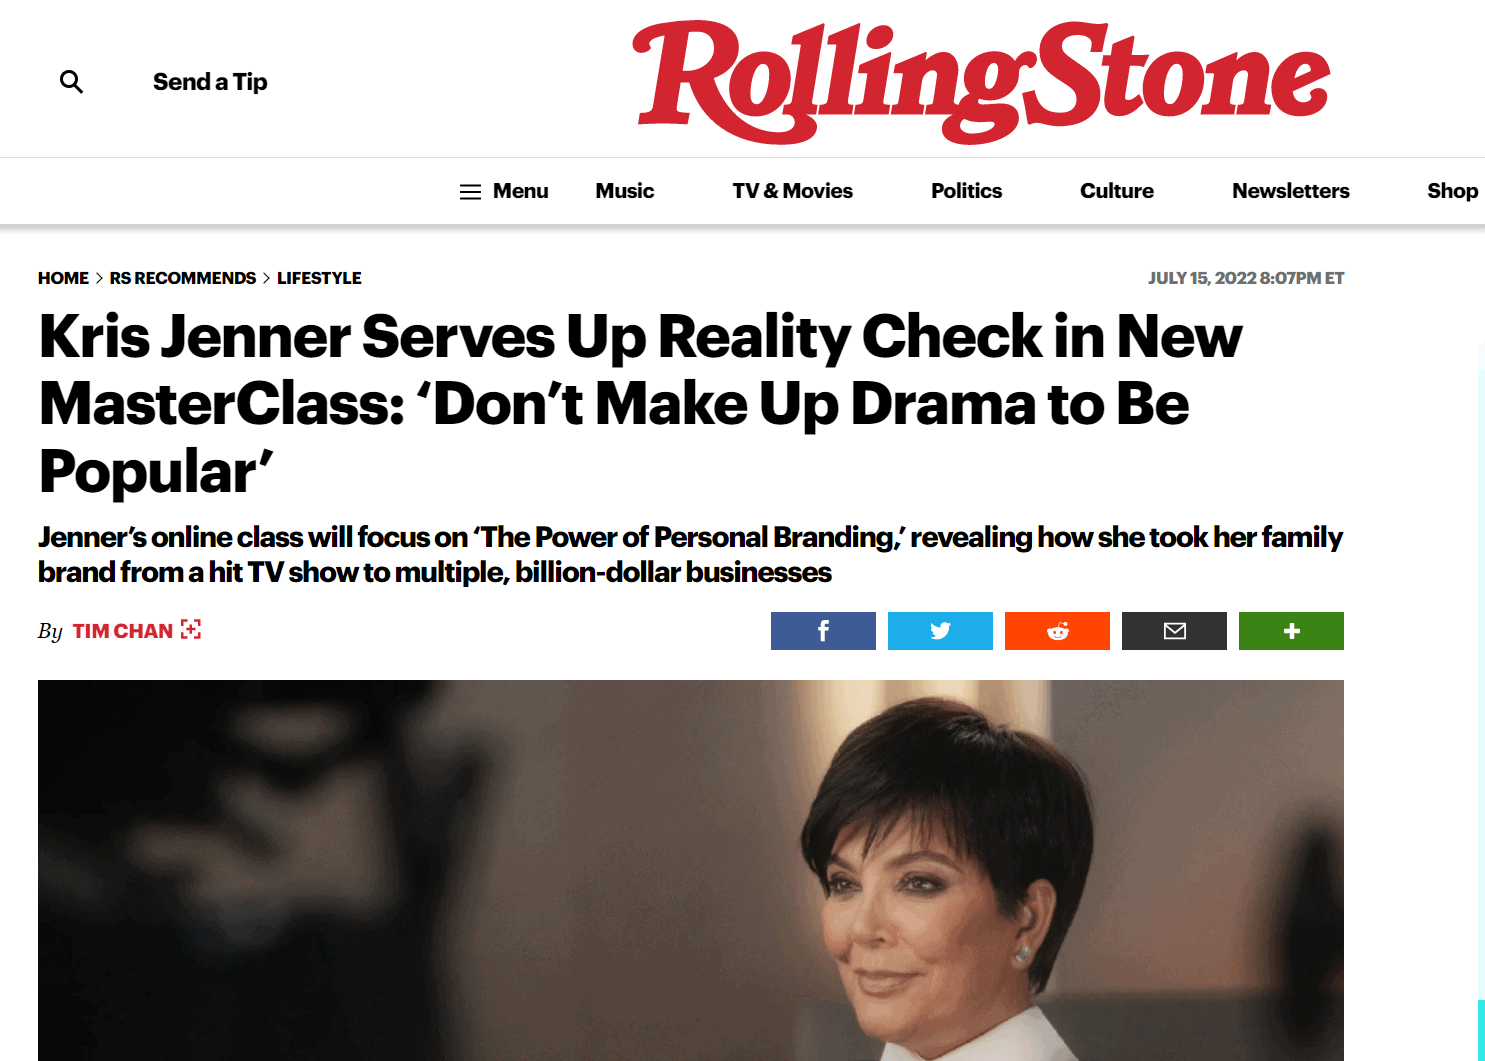 Kris Jenner Serves Up Reality Check in New MasterClass Don’t Make Up Drama to Be Popular